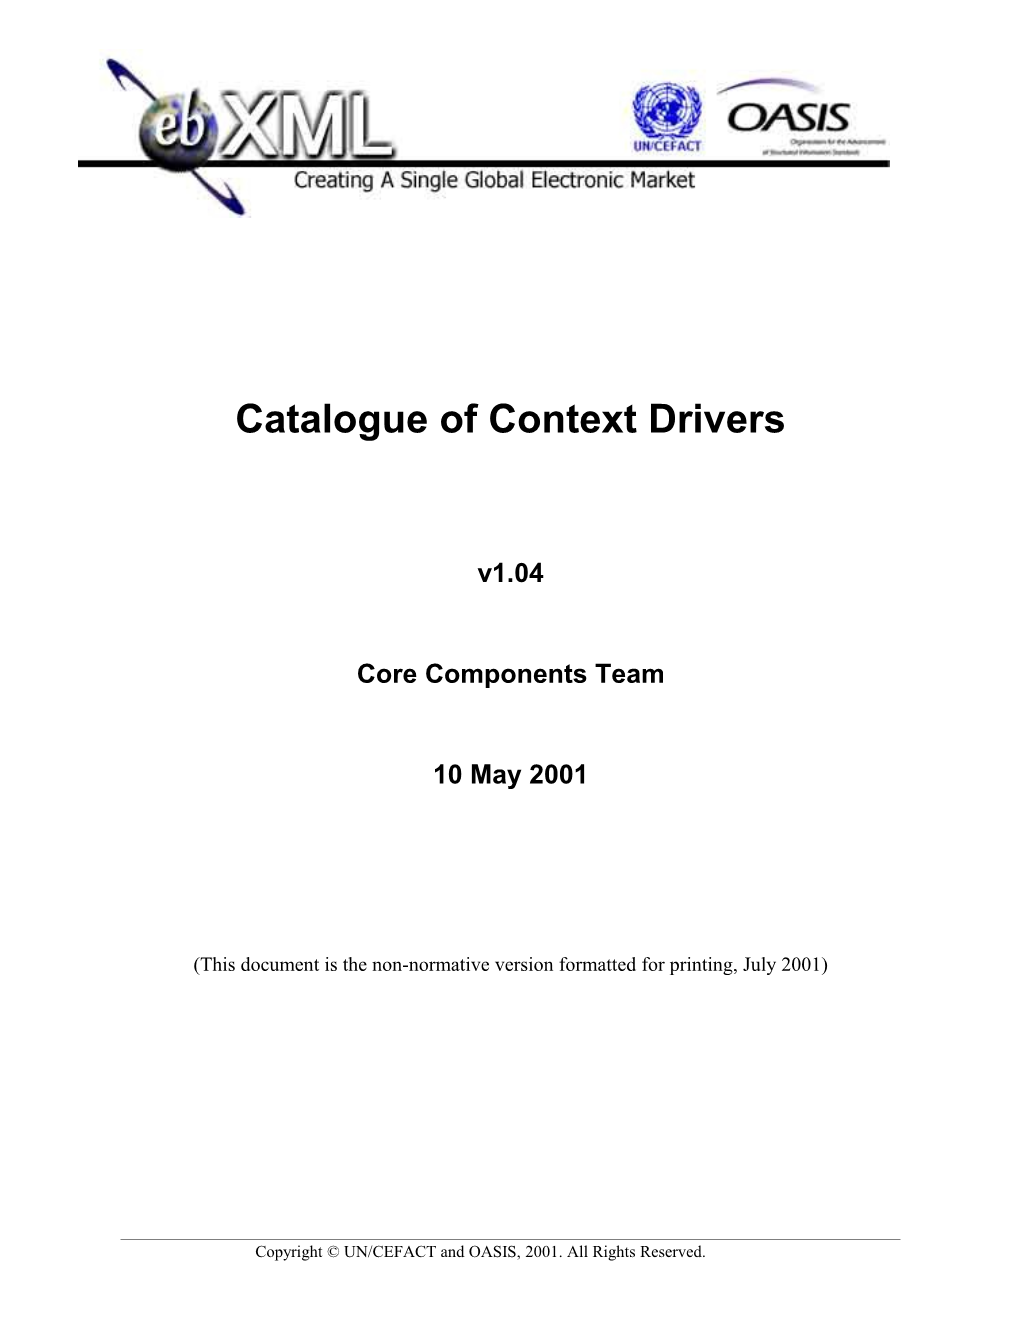 Core Components Teammay 2001